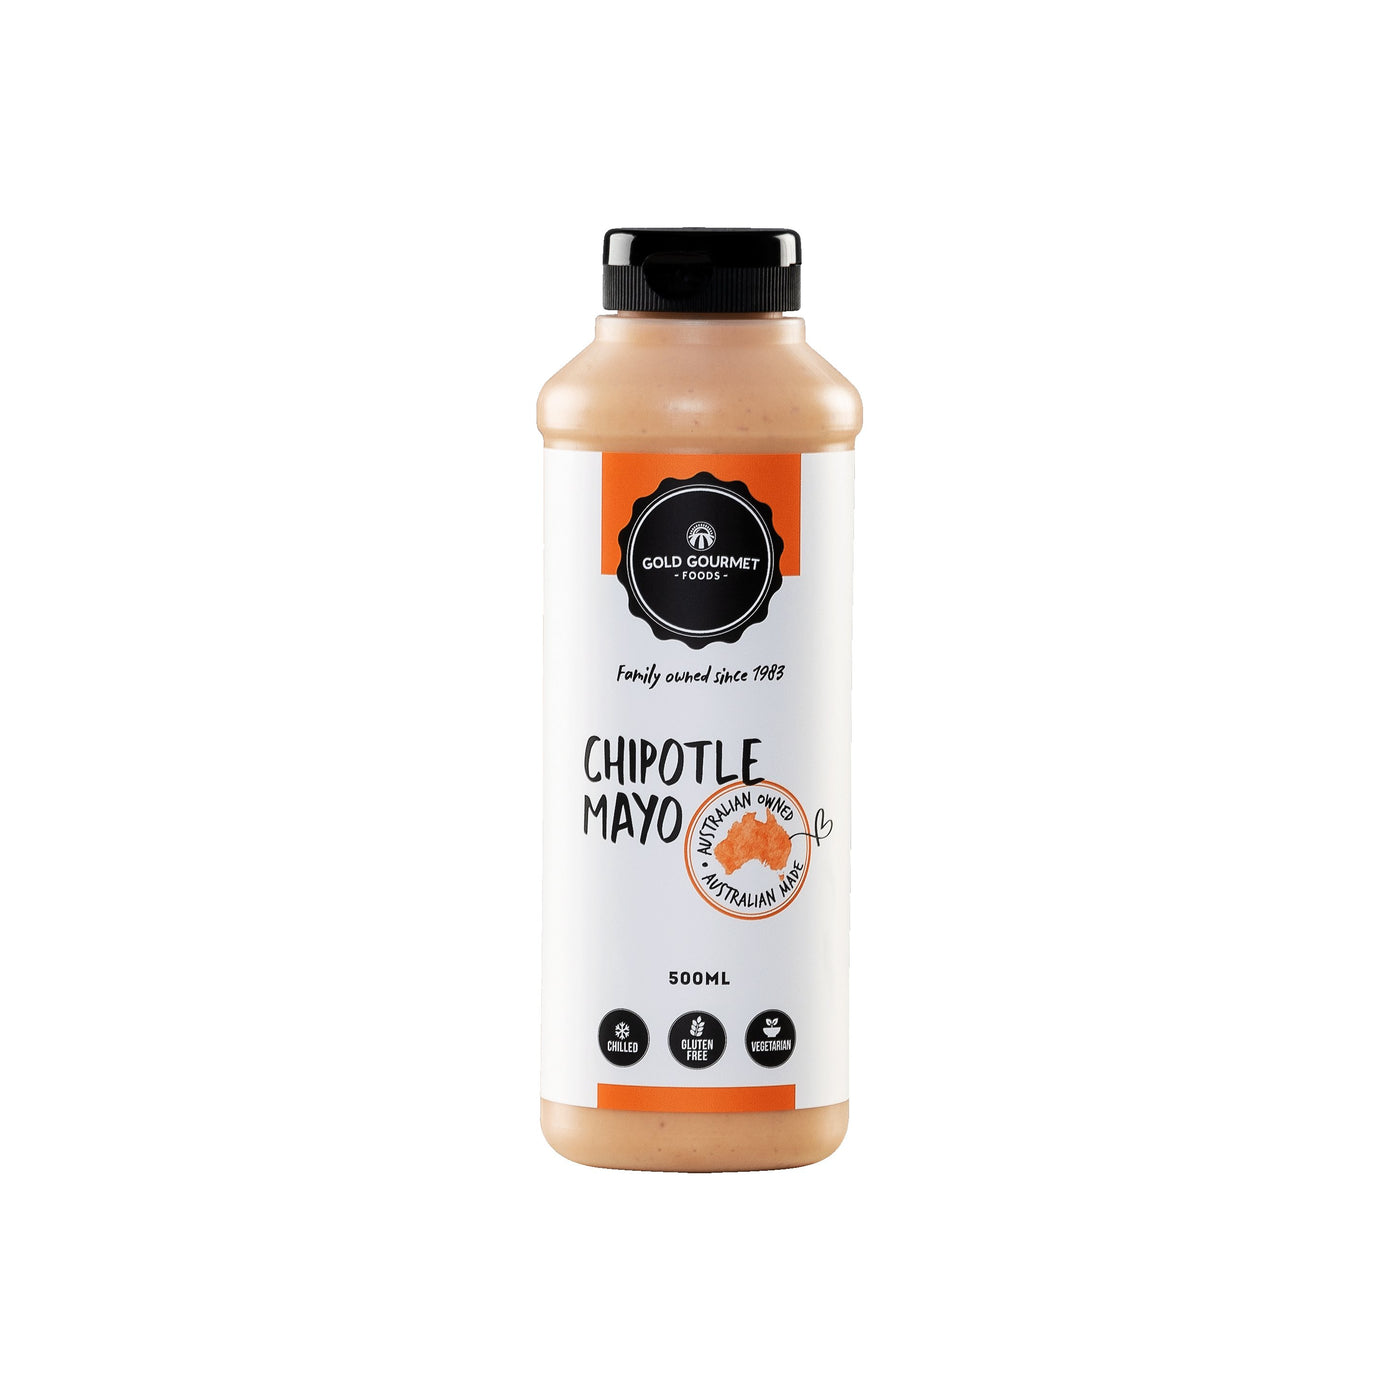 Gold Gourmet Chipotle Mayo 500ml